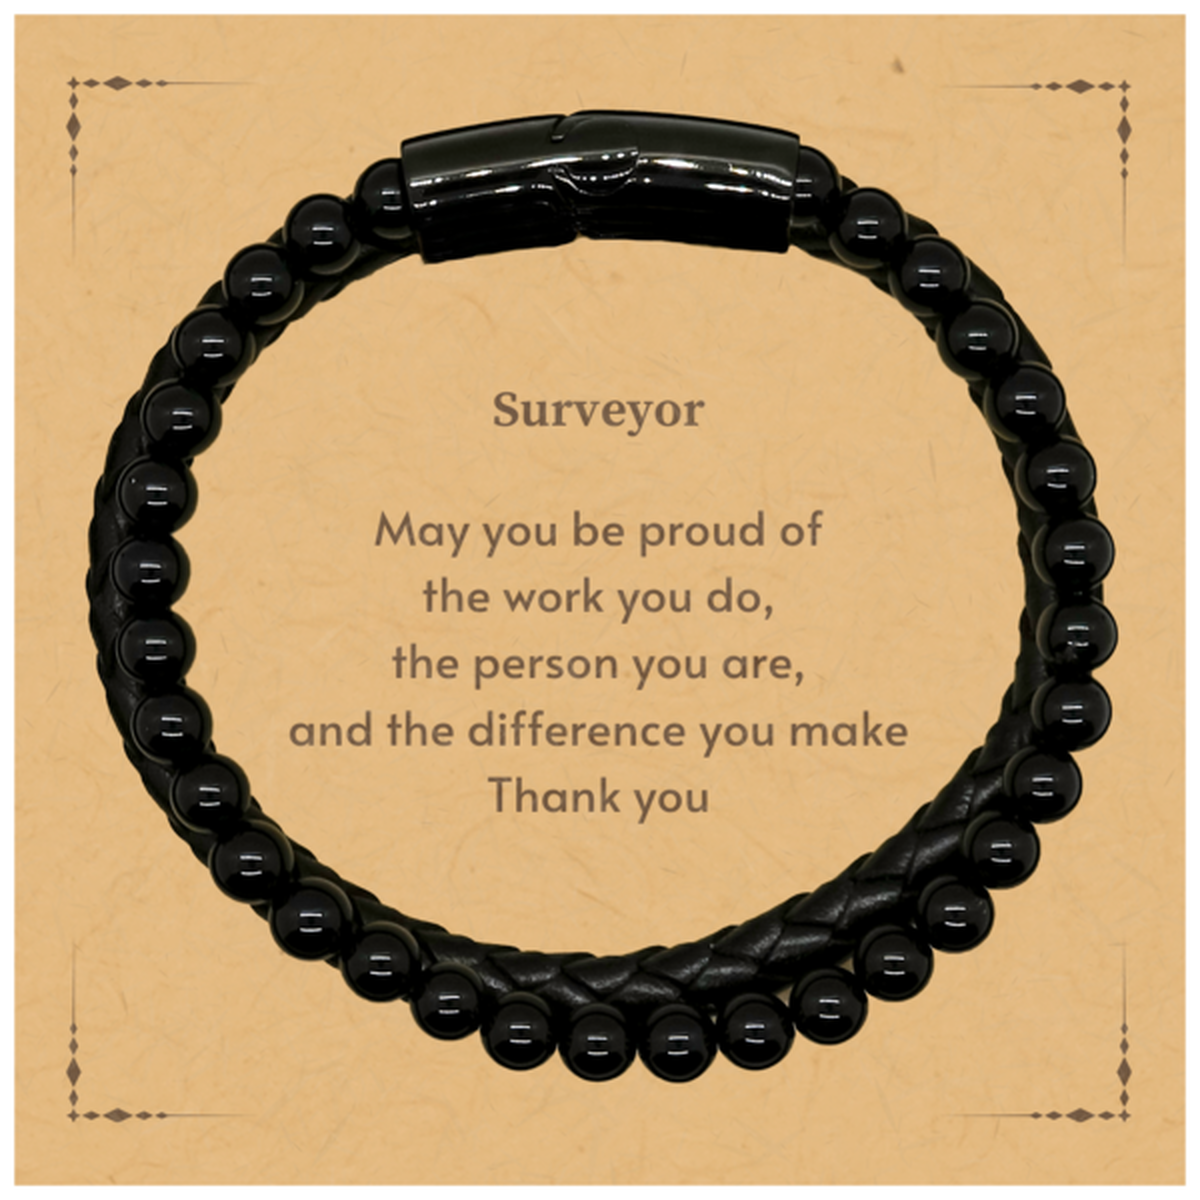 Heartwarming Stone Leather Bracelets Retirement Coworkers Gifts for Surveyor, Surveyor May You be proud of the work you do, the person you are Gifts for Boss Men Women Friends